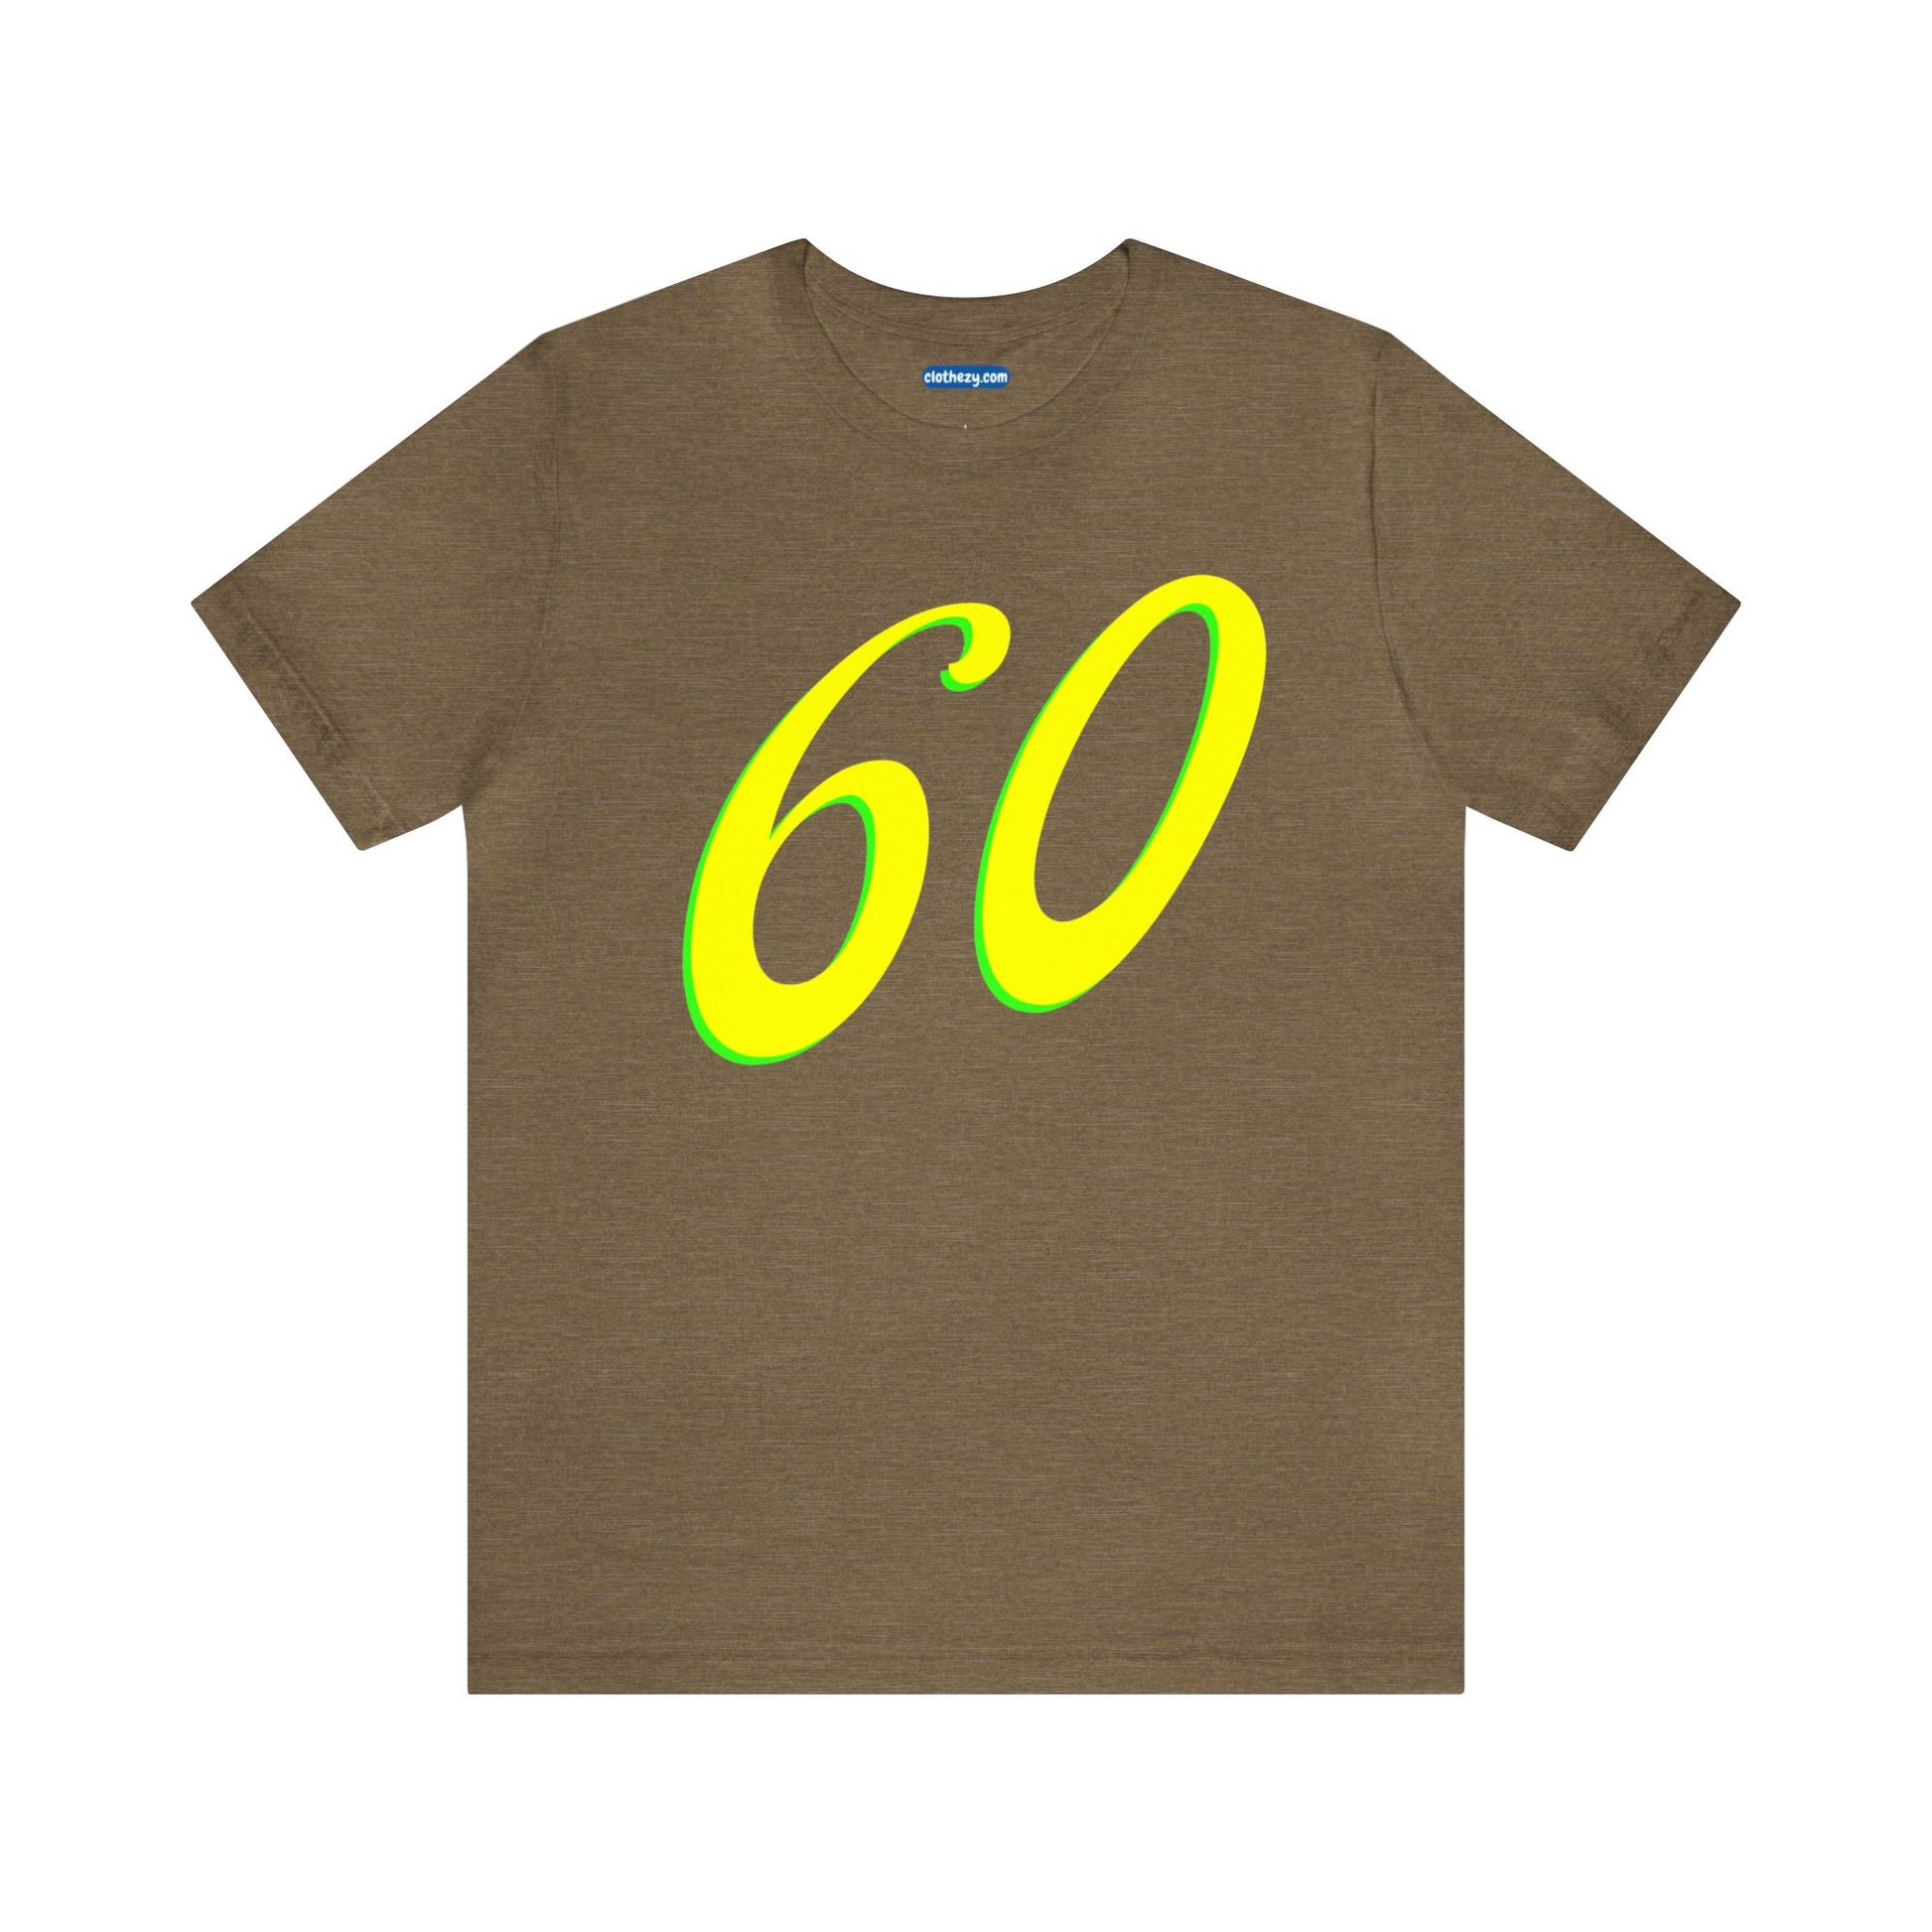 Number 60 Design - Soft Cotton Tee for birthdays and celebrations, Gift for friends and family, Multiple Options by clothezy.com in Olive Heather Size Small - Buy Now